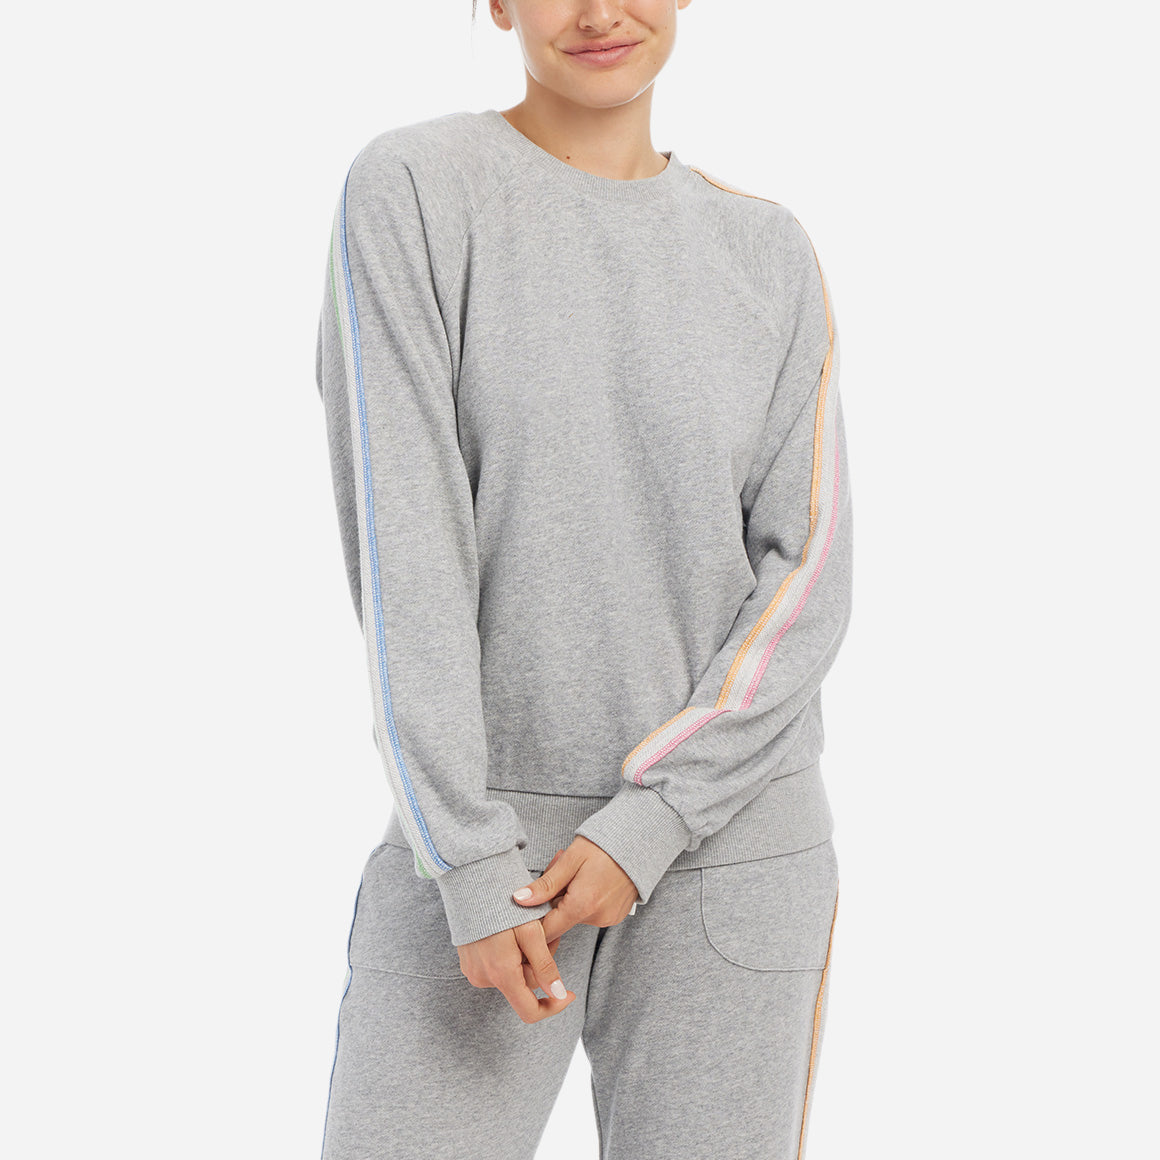 This cozy loungewear top features a relaxed fit and is detailed with neon stripes along the sleeves for a modern pop of color. 